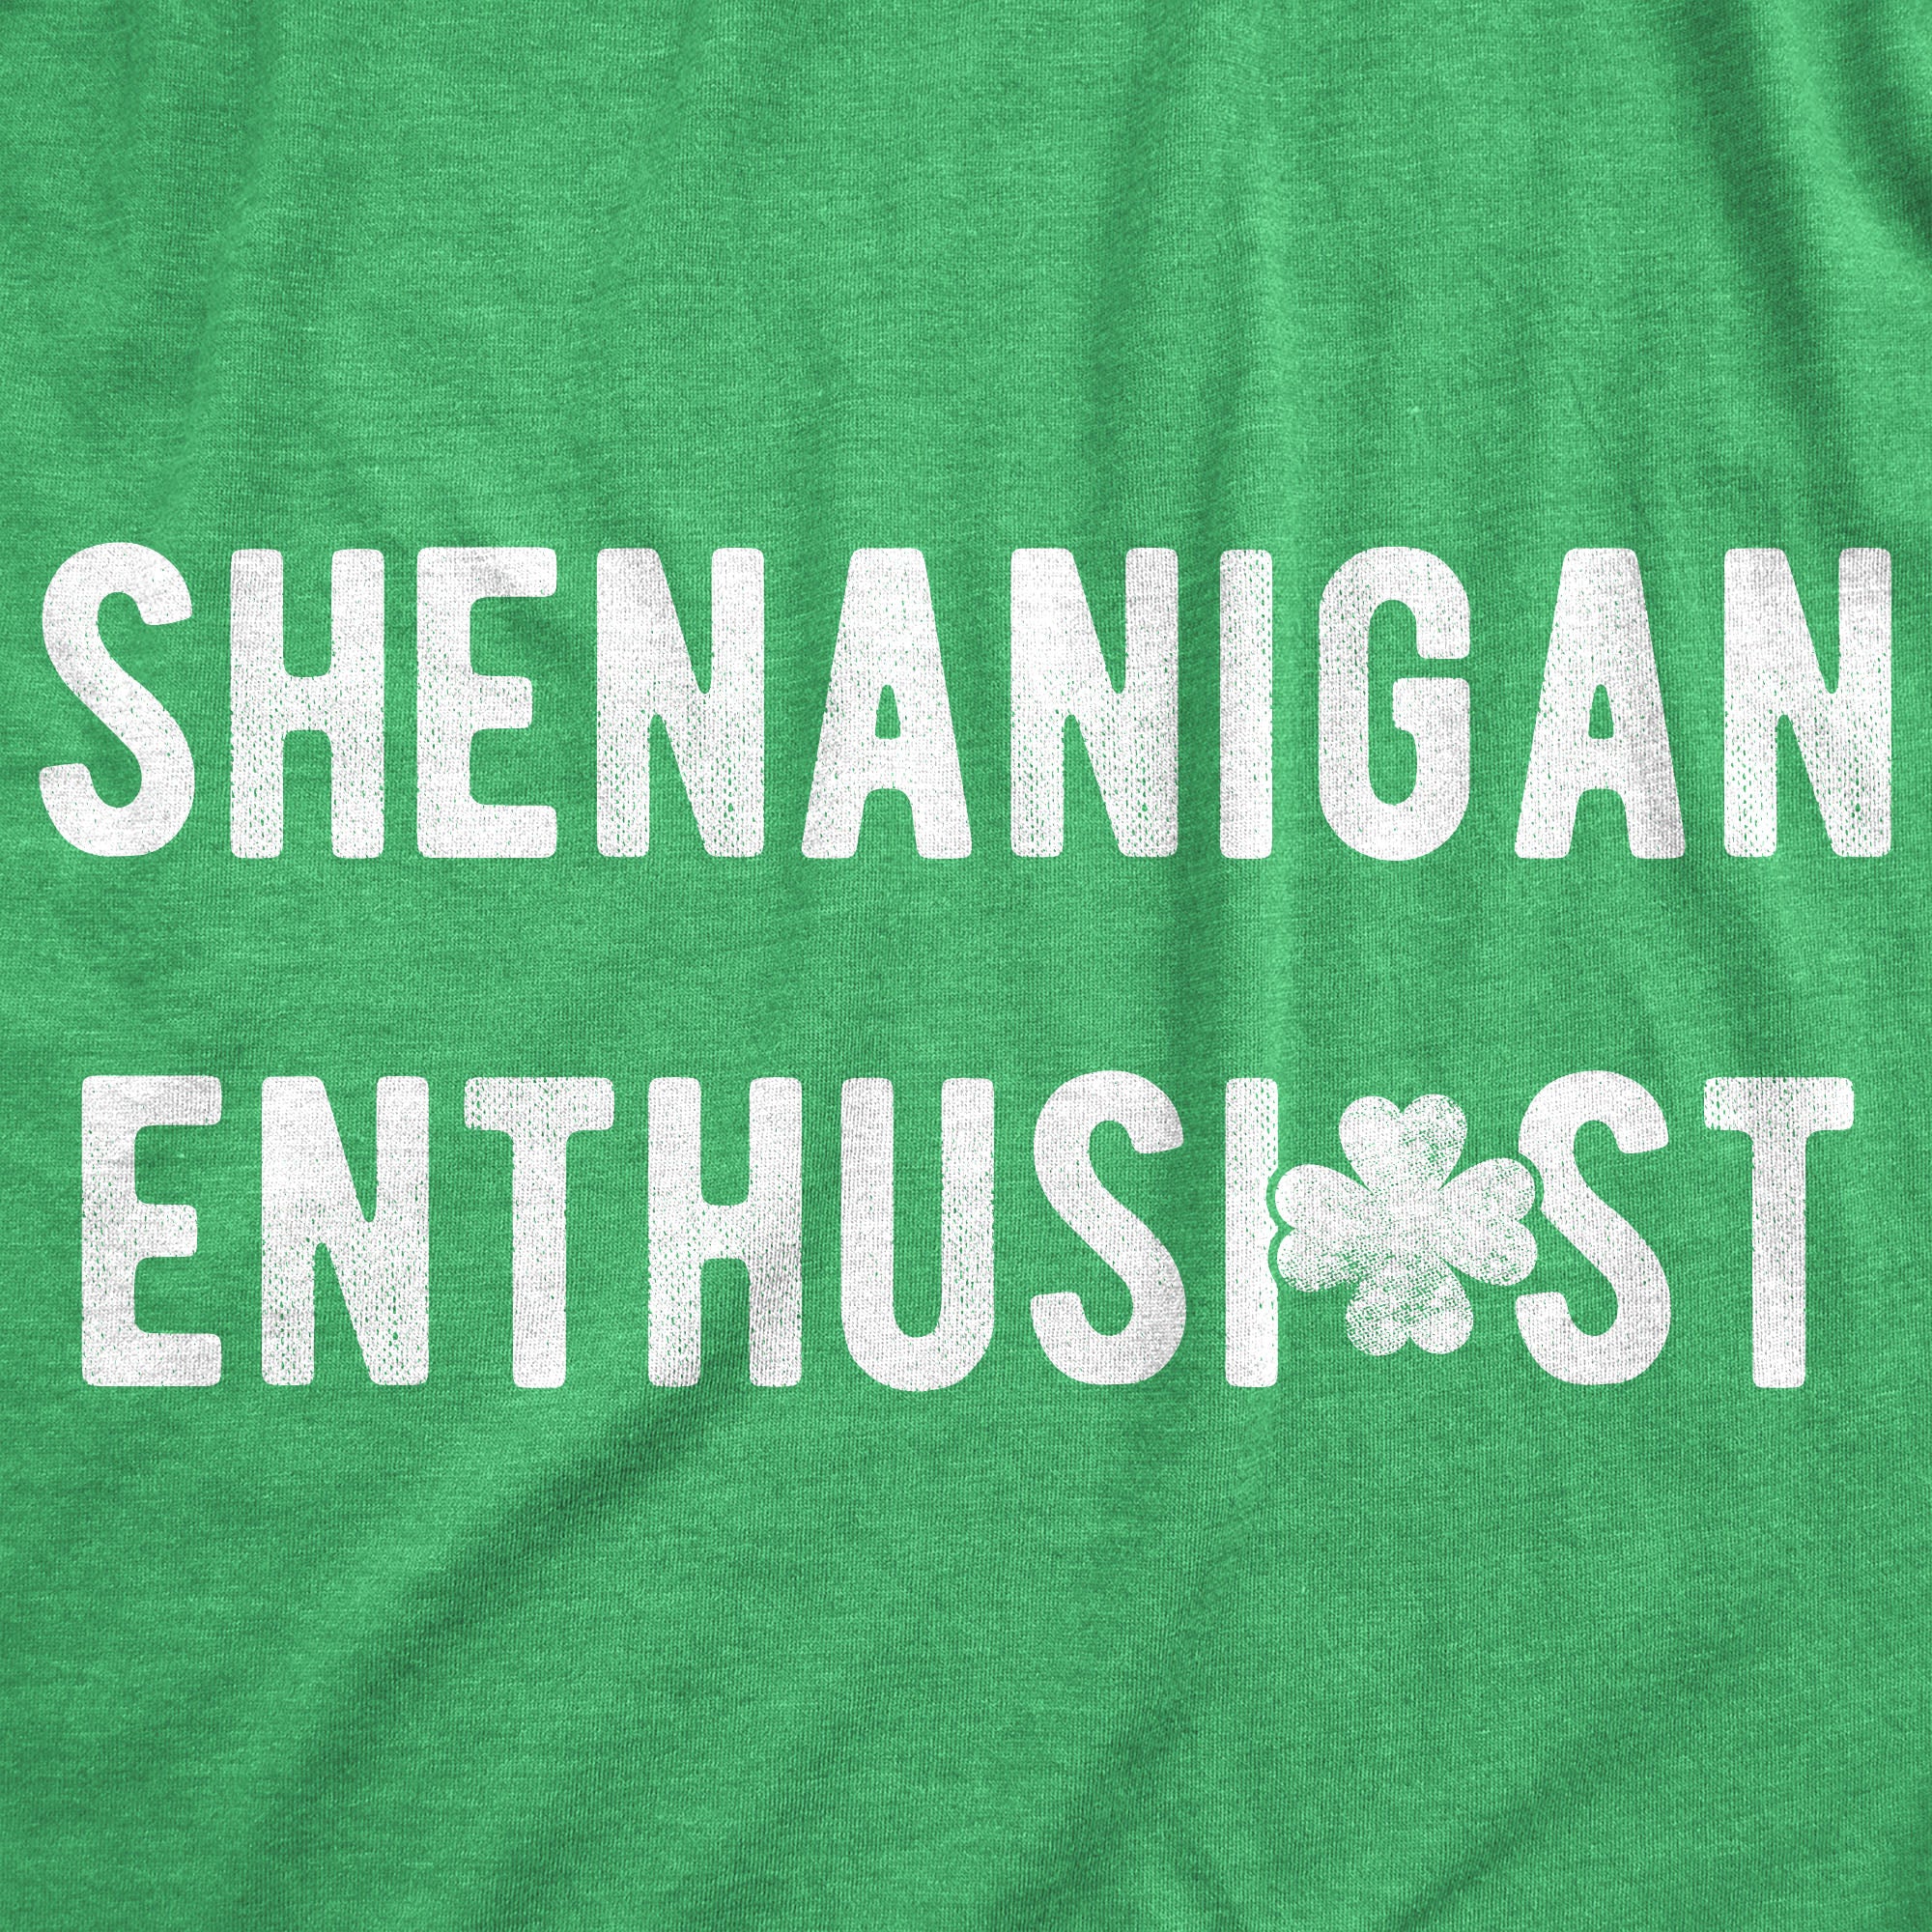 Funny Heather Green - Shenanigan Enthusiast Text Shenanigan Enthusiast Mens T Shirt Nerdy Saint Patrick's Day Tee